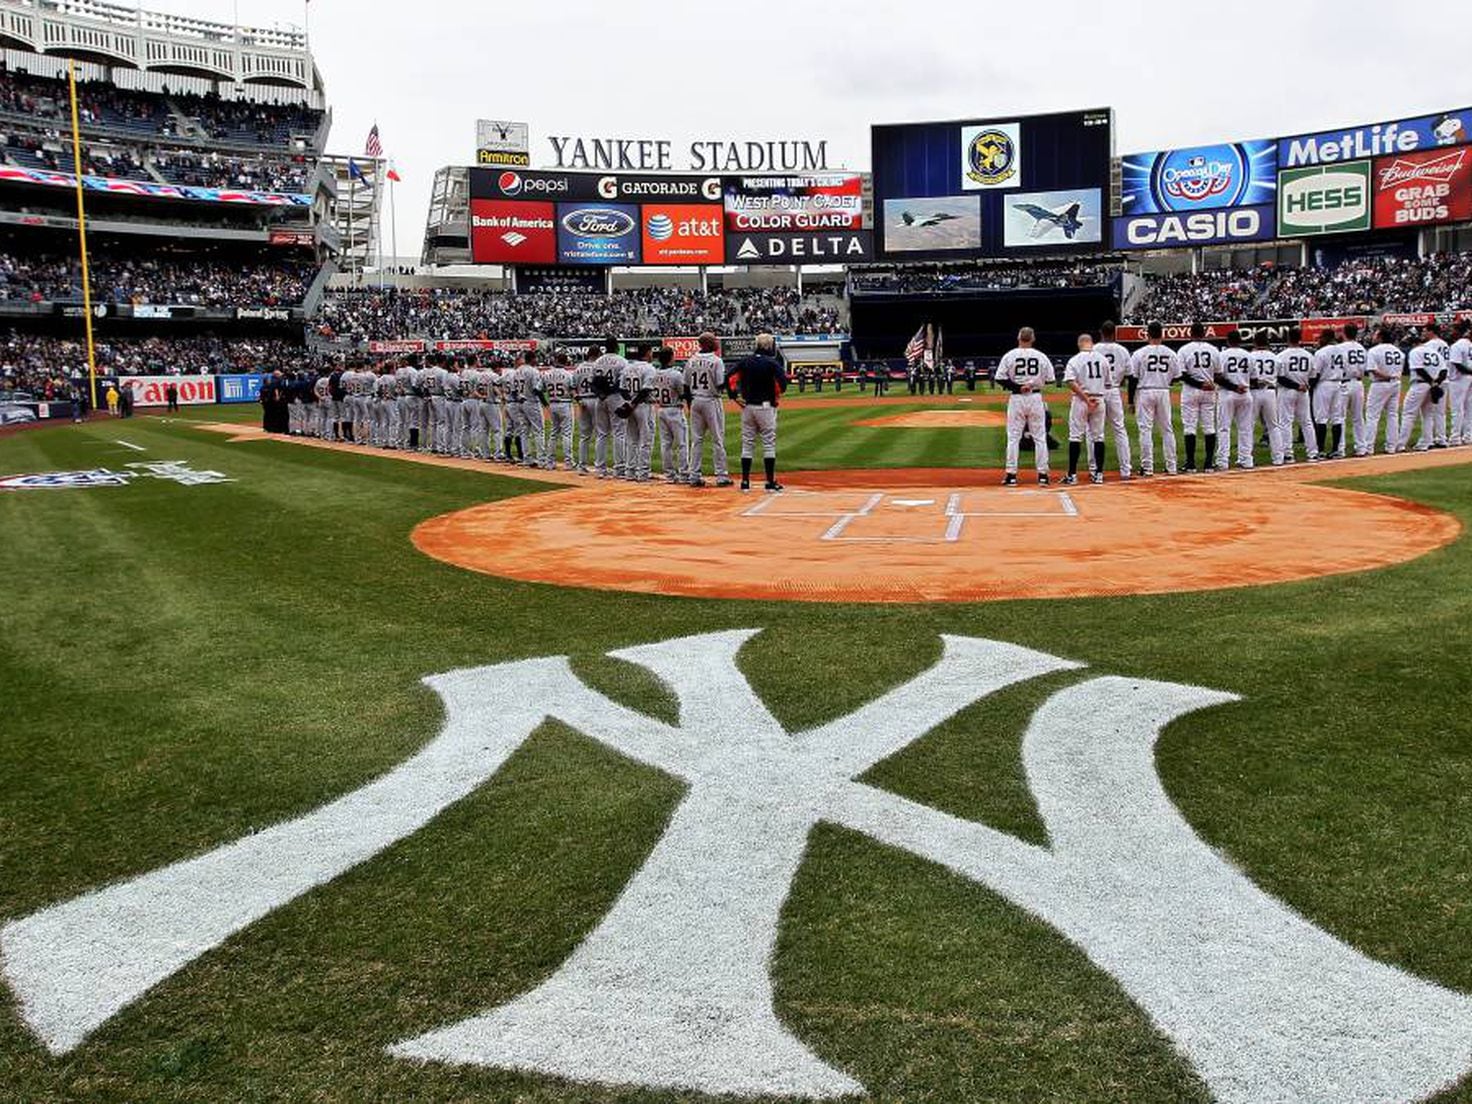 Yankees add Starr Insurance advertising patch to uniform - Newsday